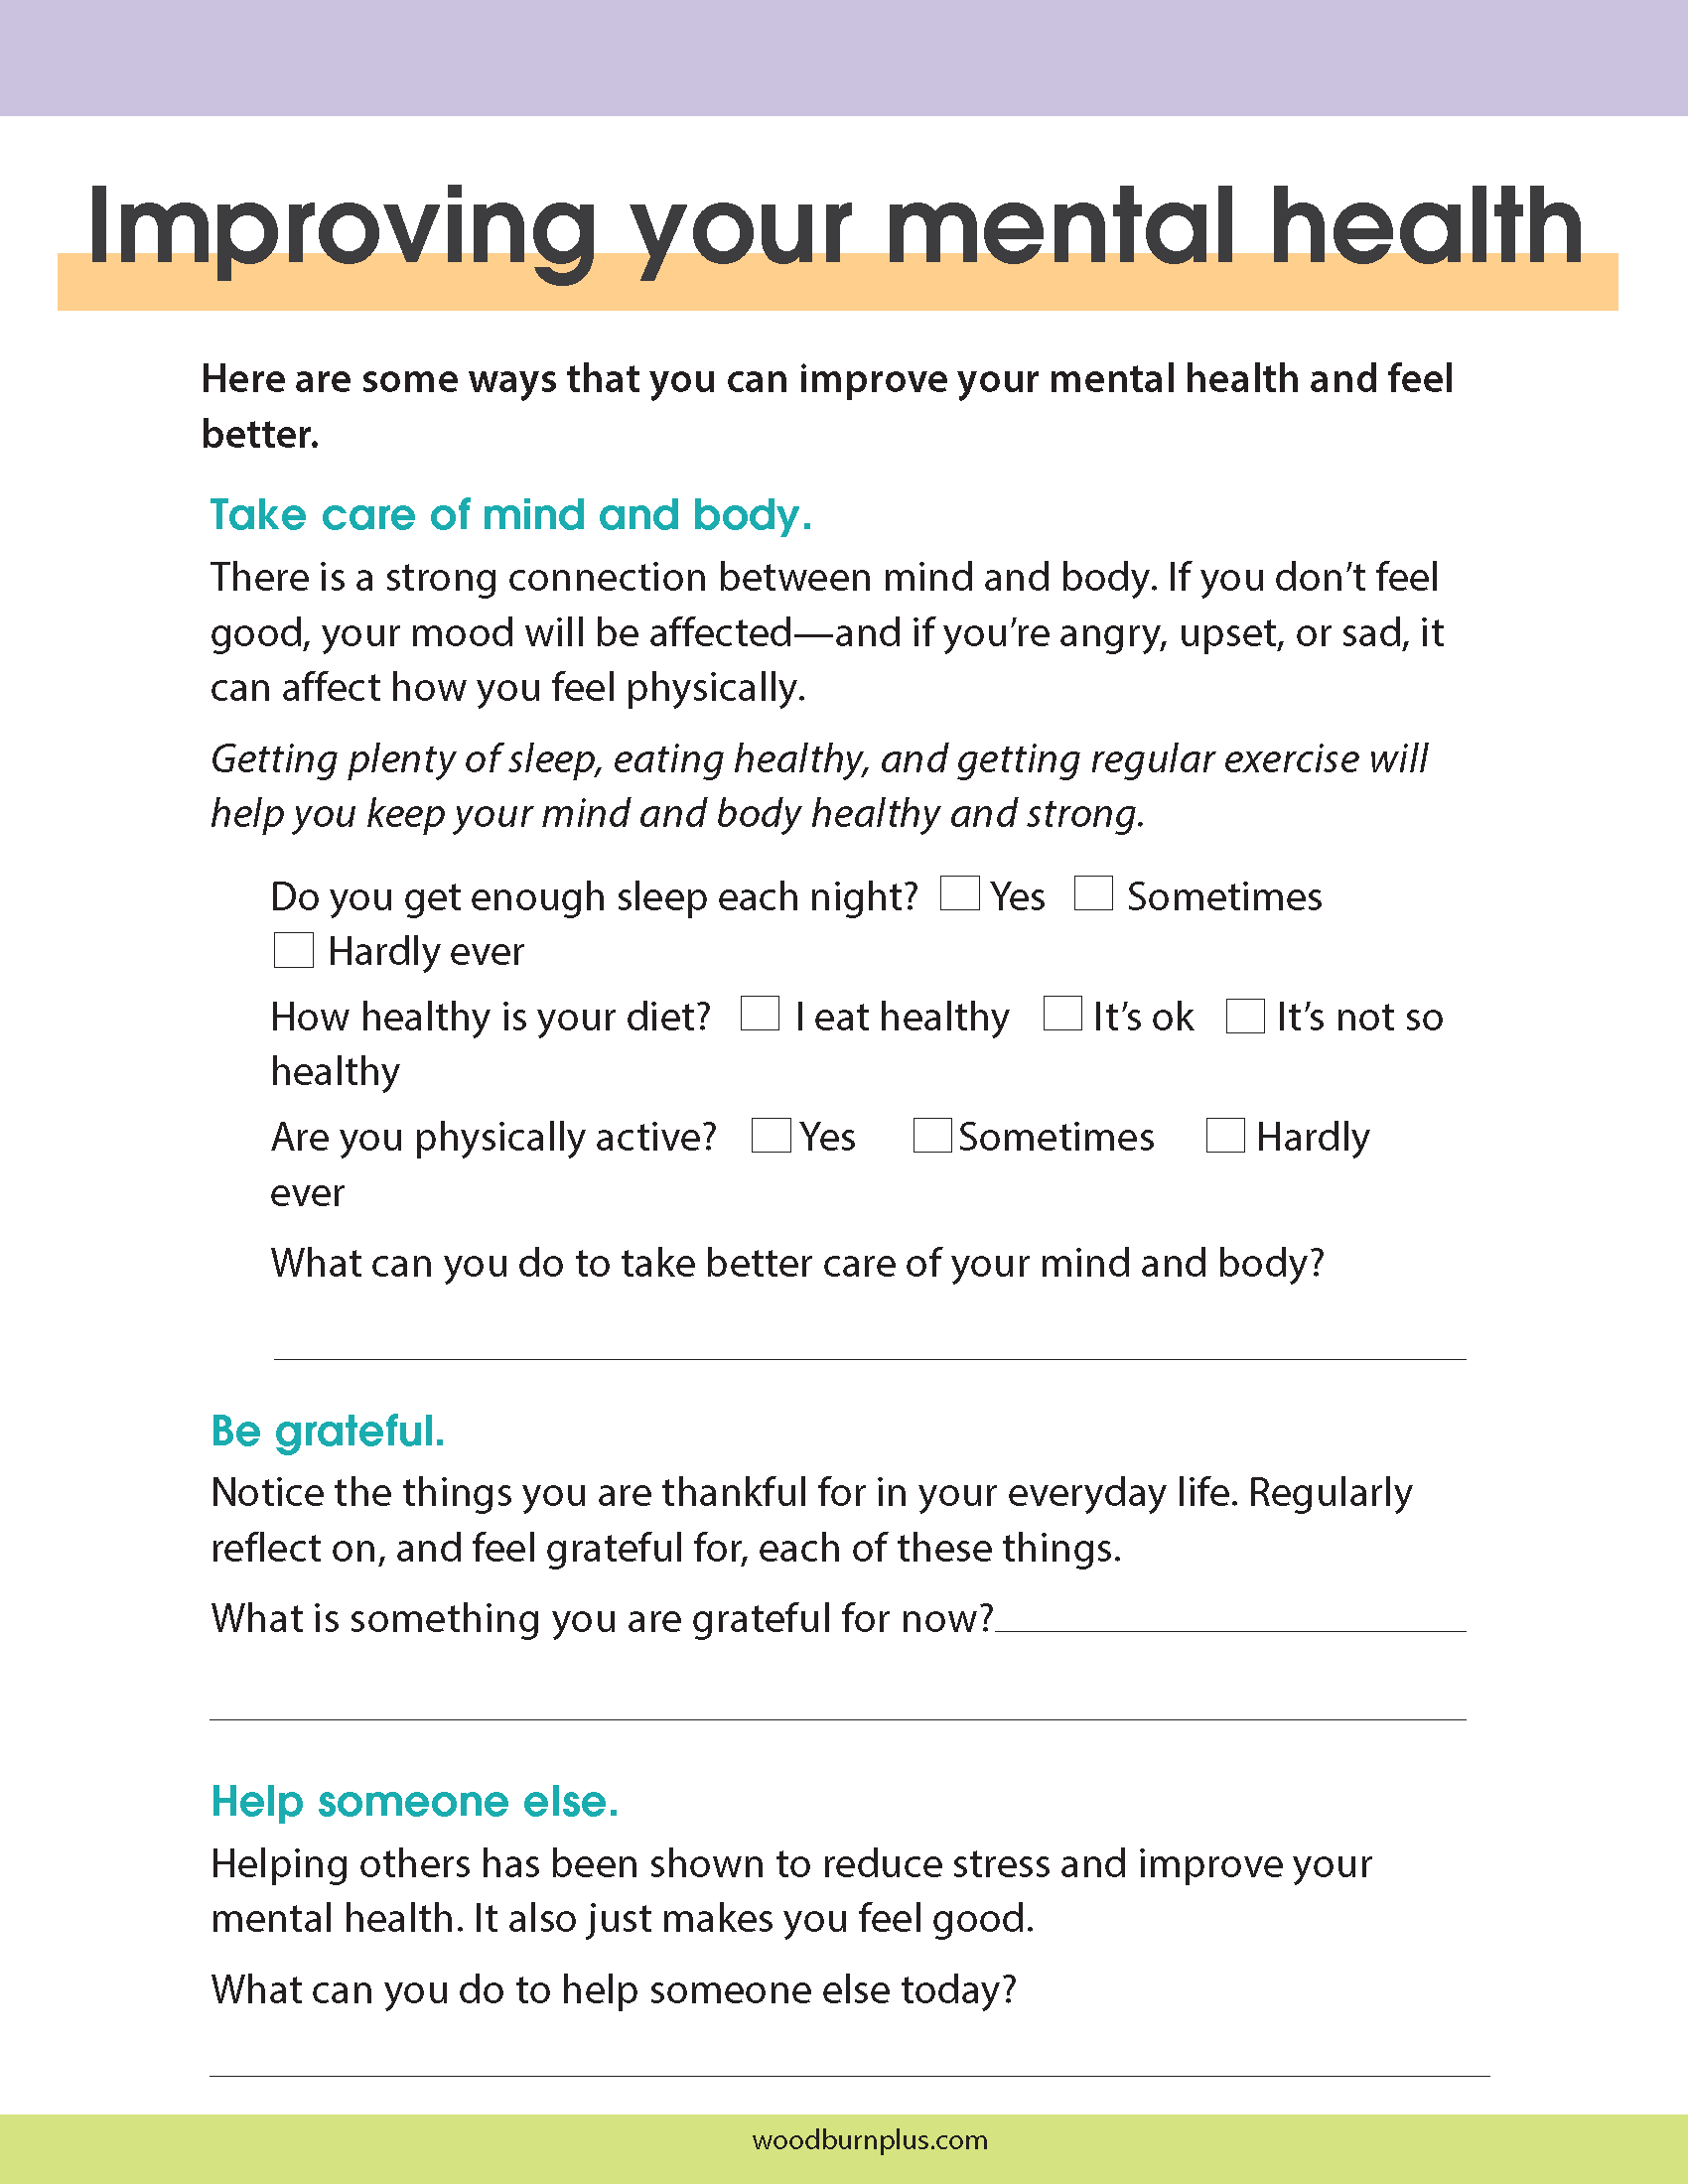 Improving Your Mental Health